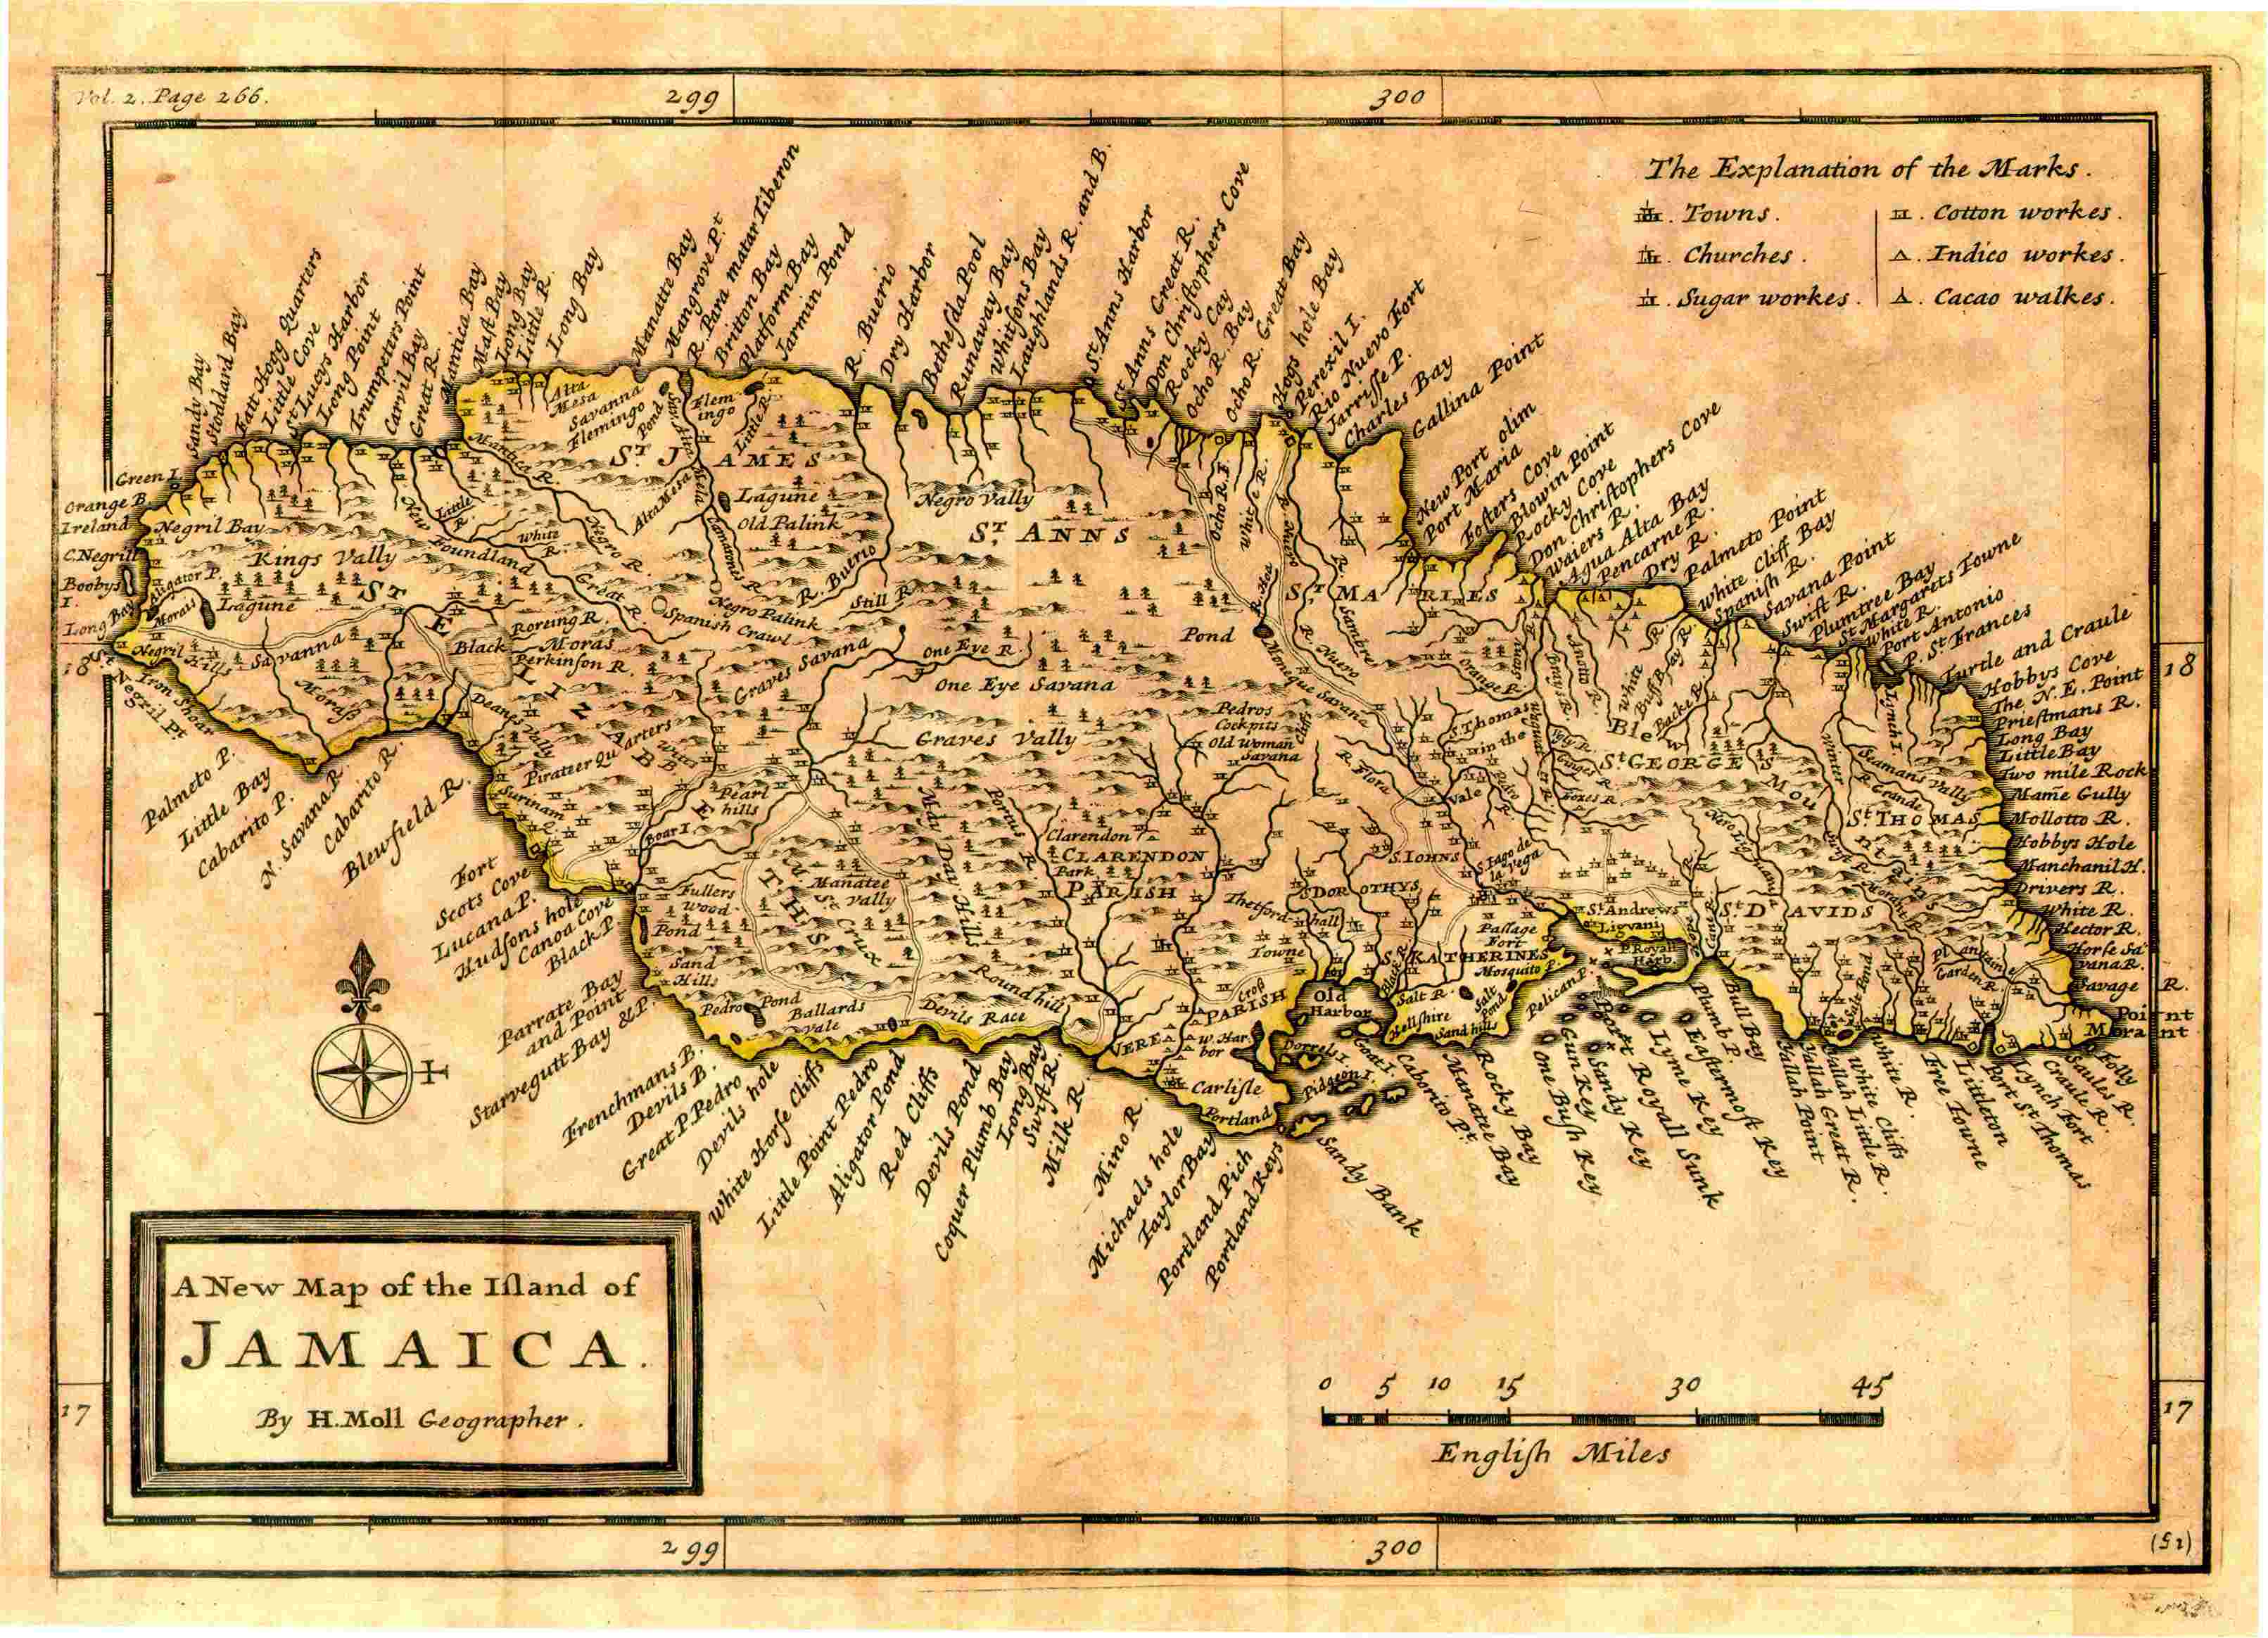 Herman Moll. A New Map of the Island of Jamaica. 1717